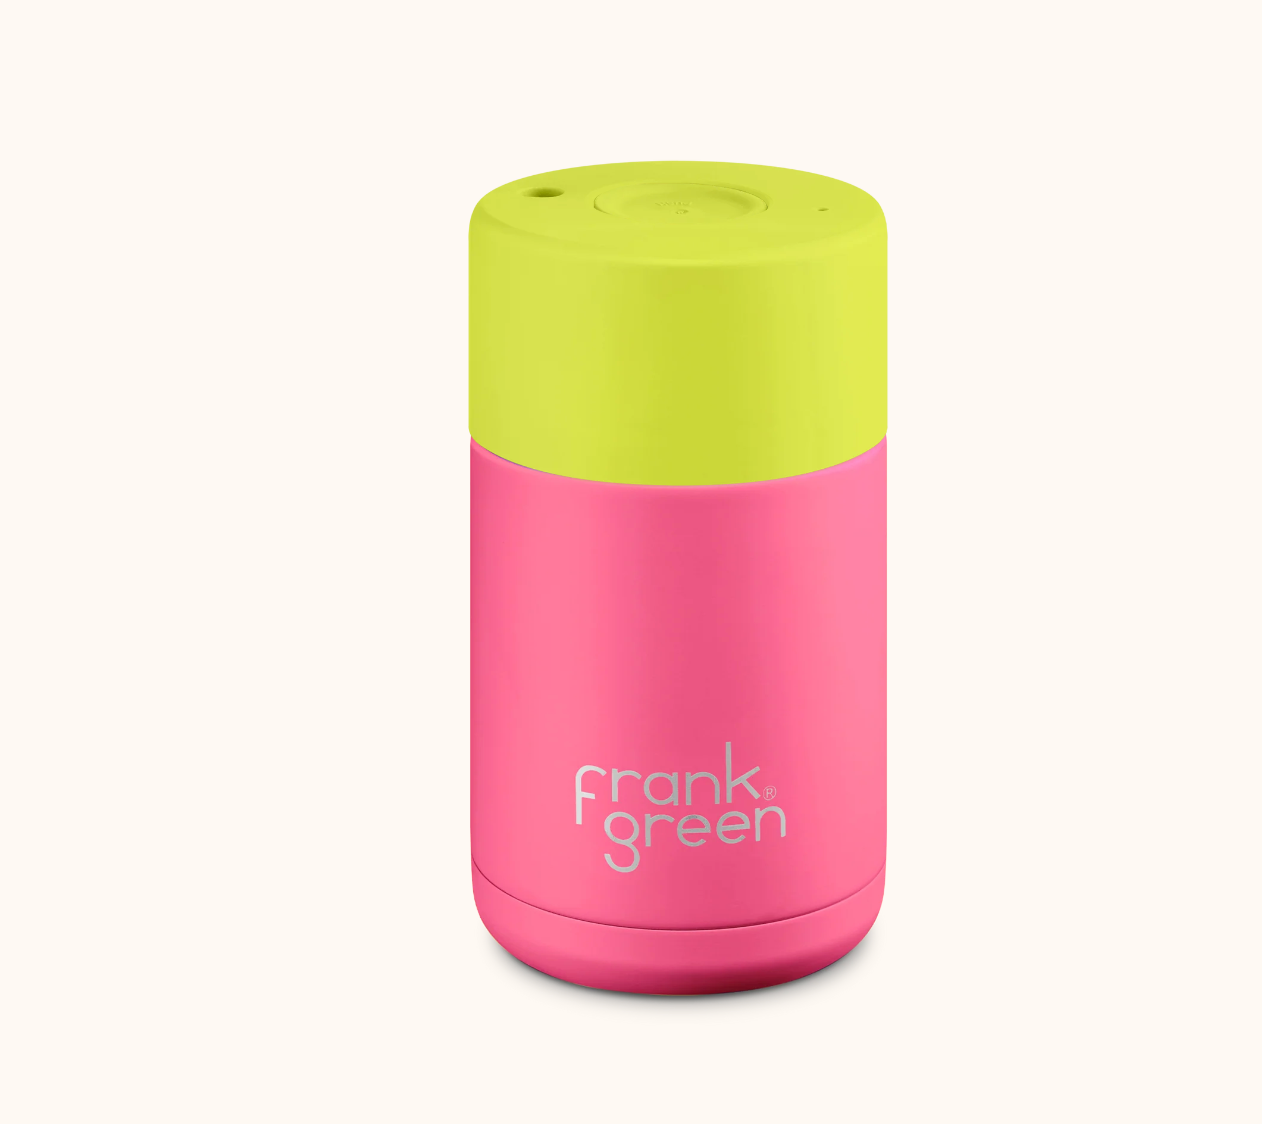 Stainless Steel Ceramic Reusable Cup |NEON PINK|- 10 oz